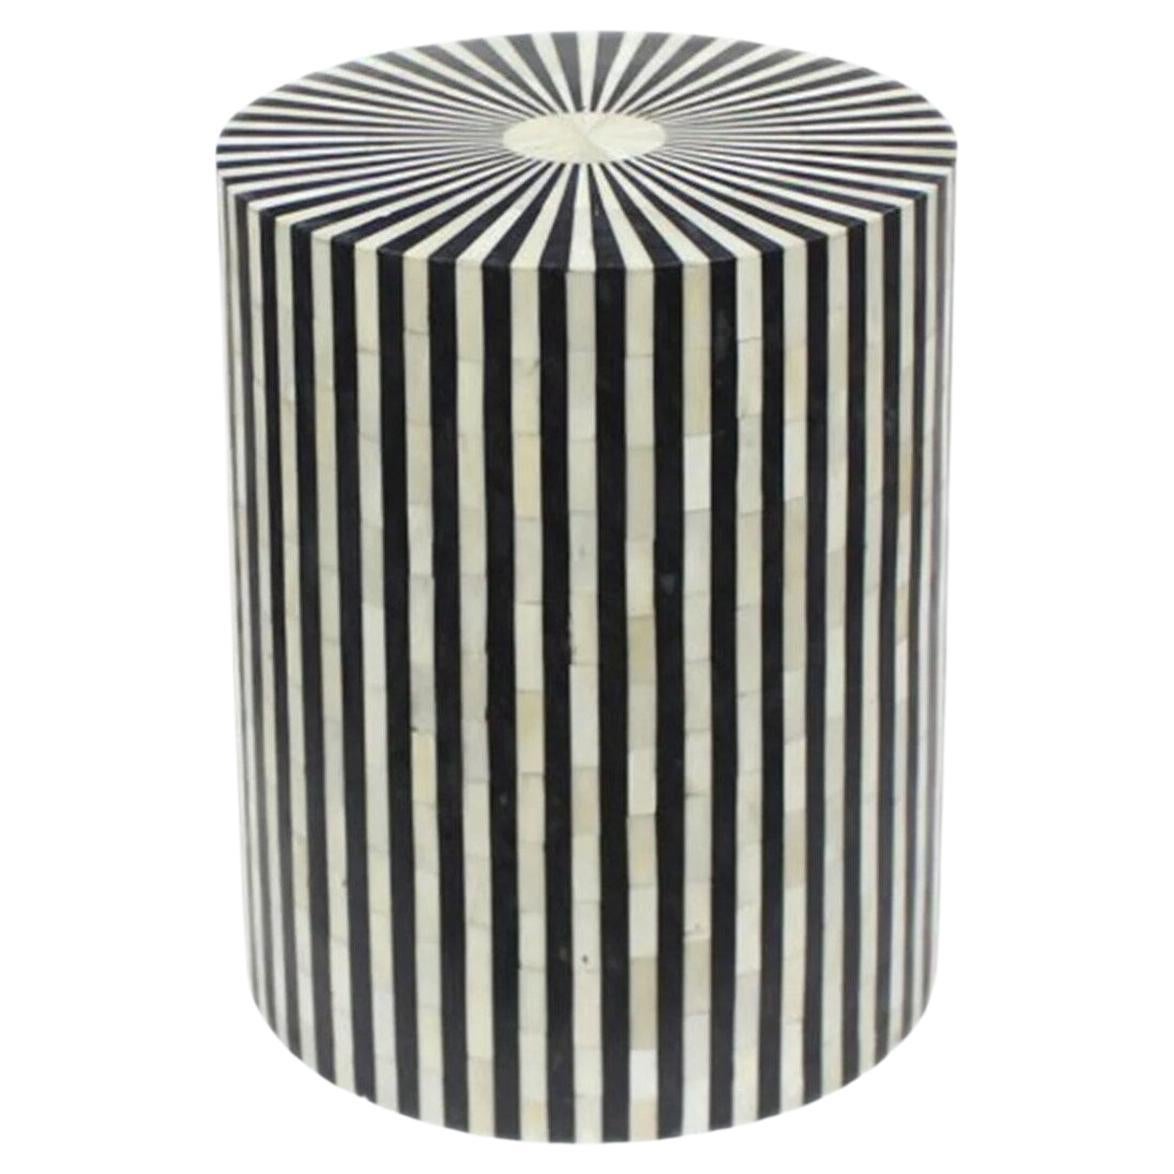 Bone Inlay End Table in Black and White